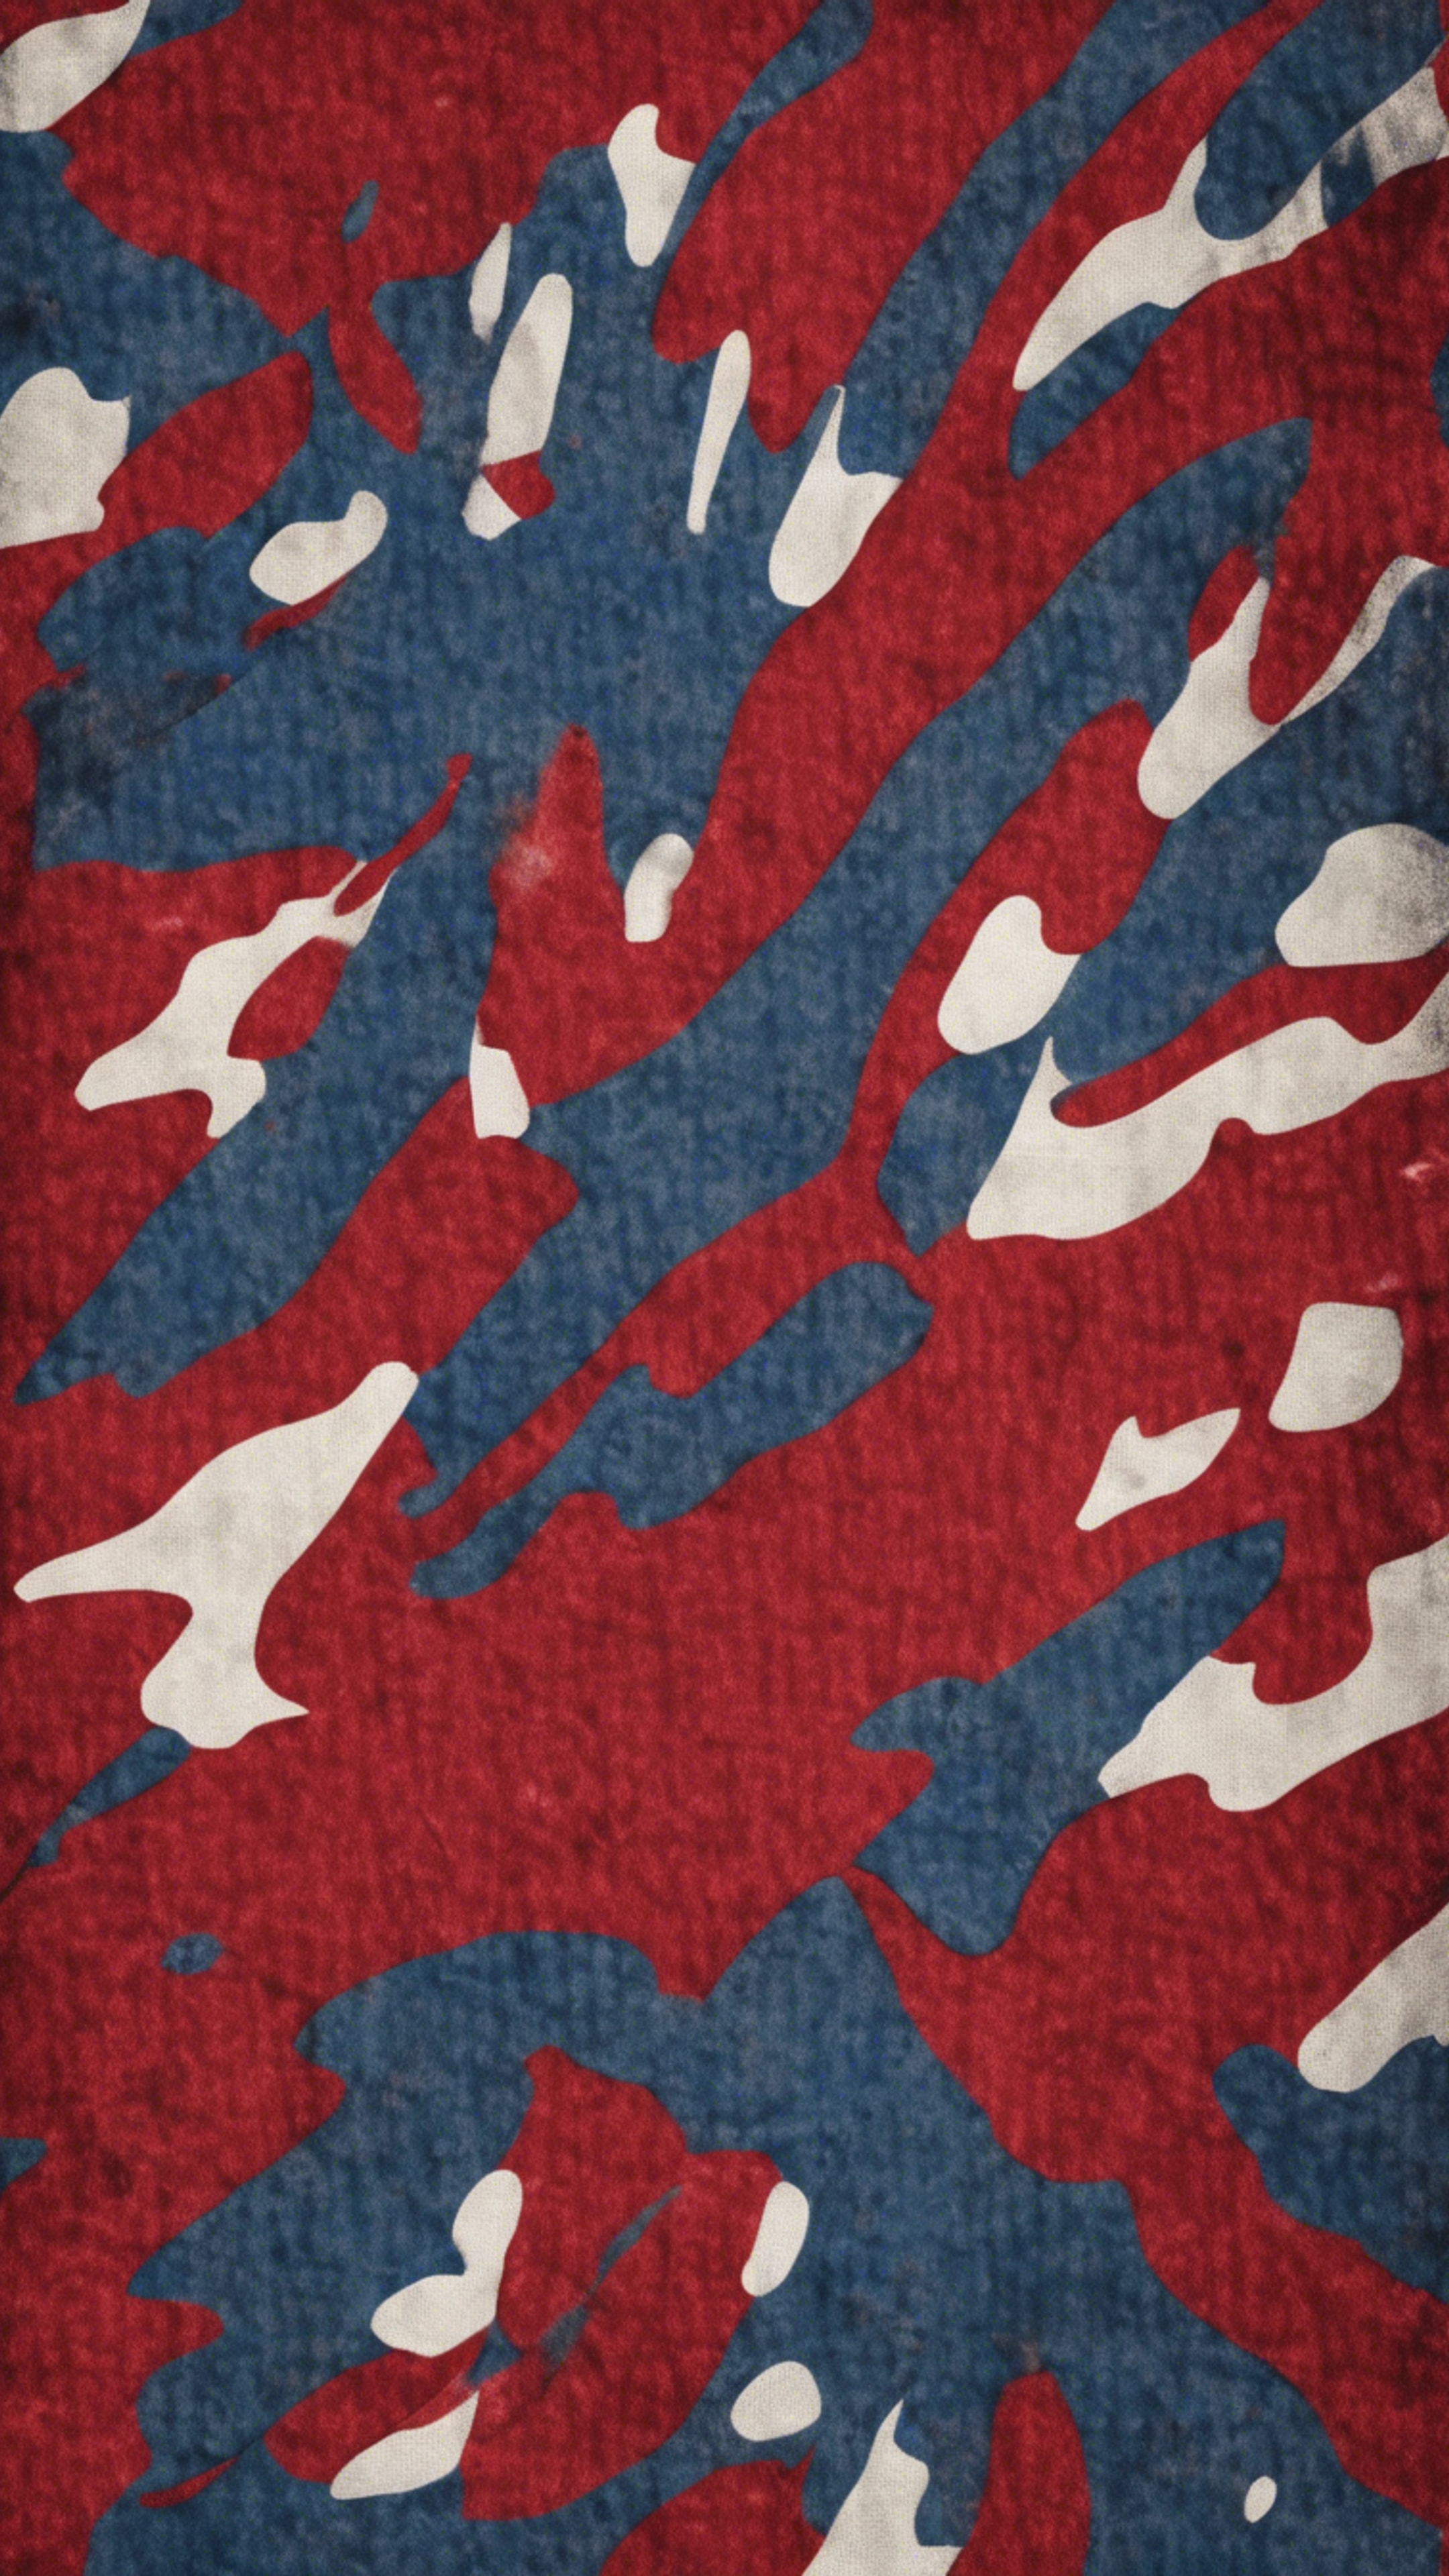 Red and blue camouflage pattern used in navy uniforms. Behang[01ccfb252ca748fab57f]